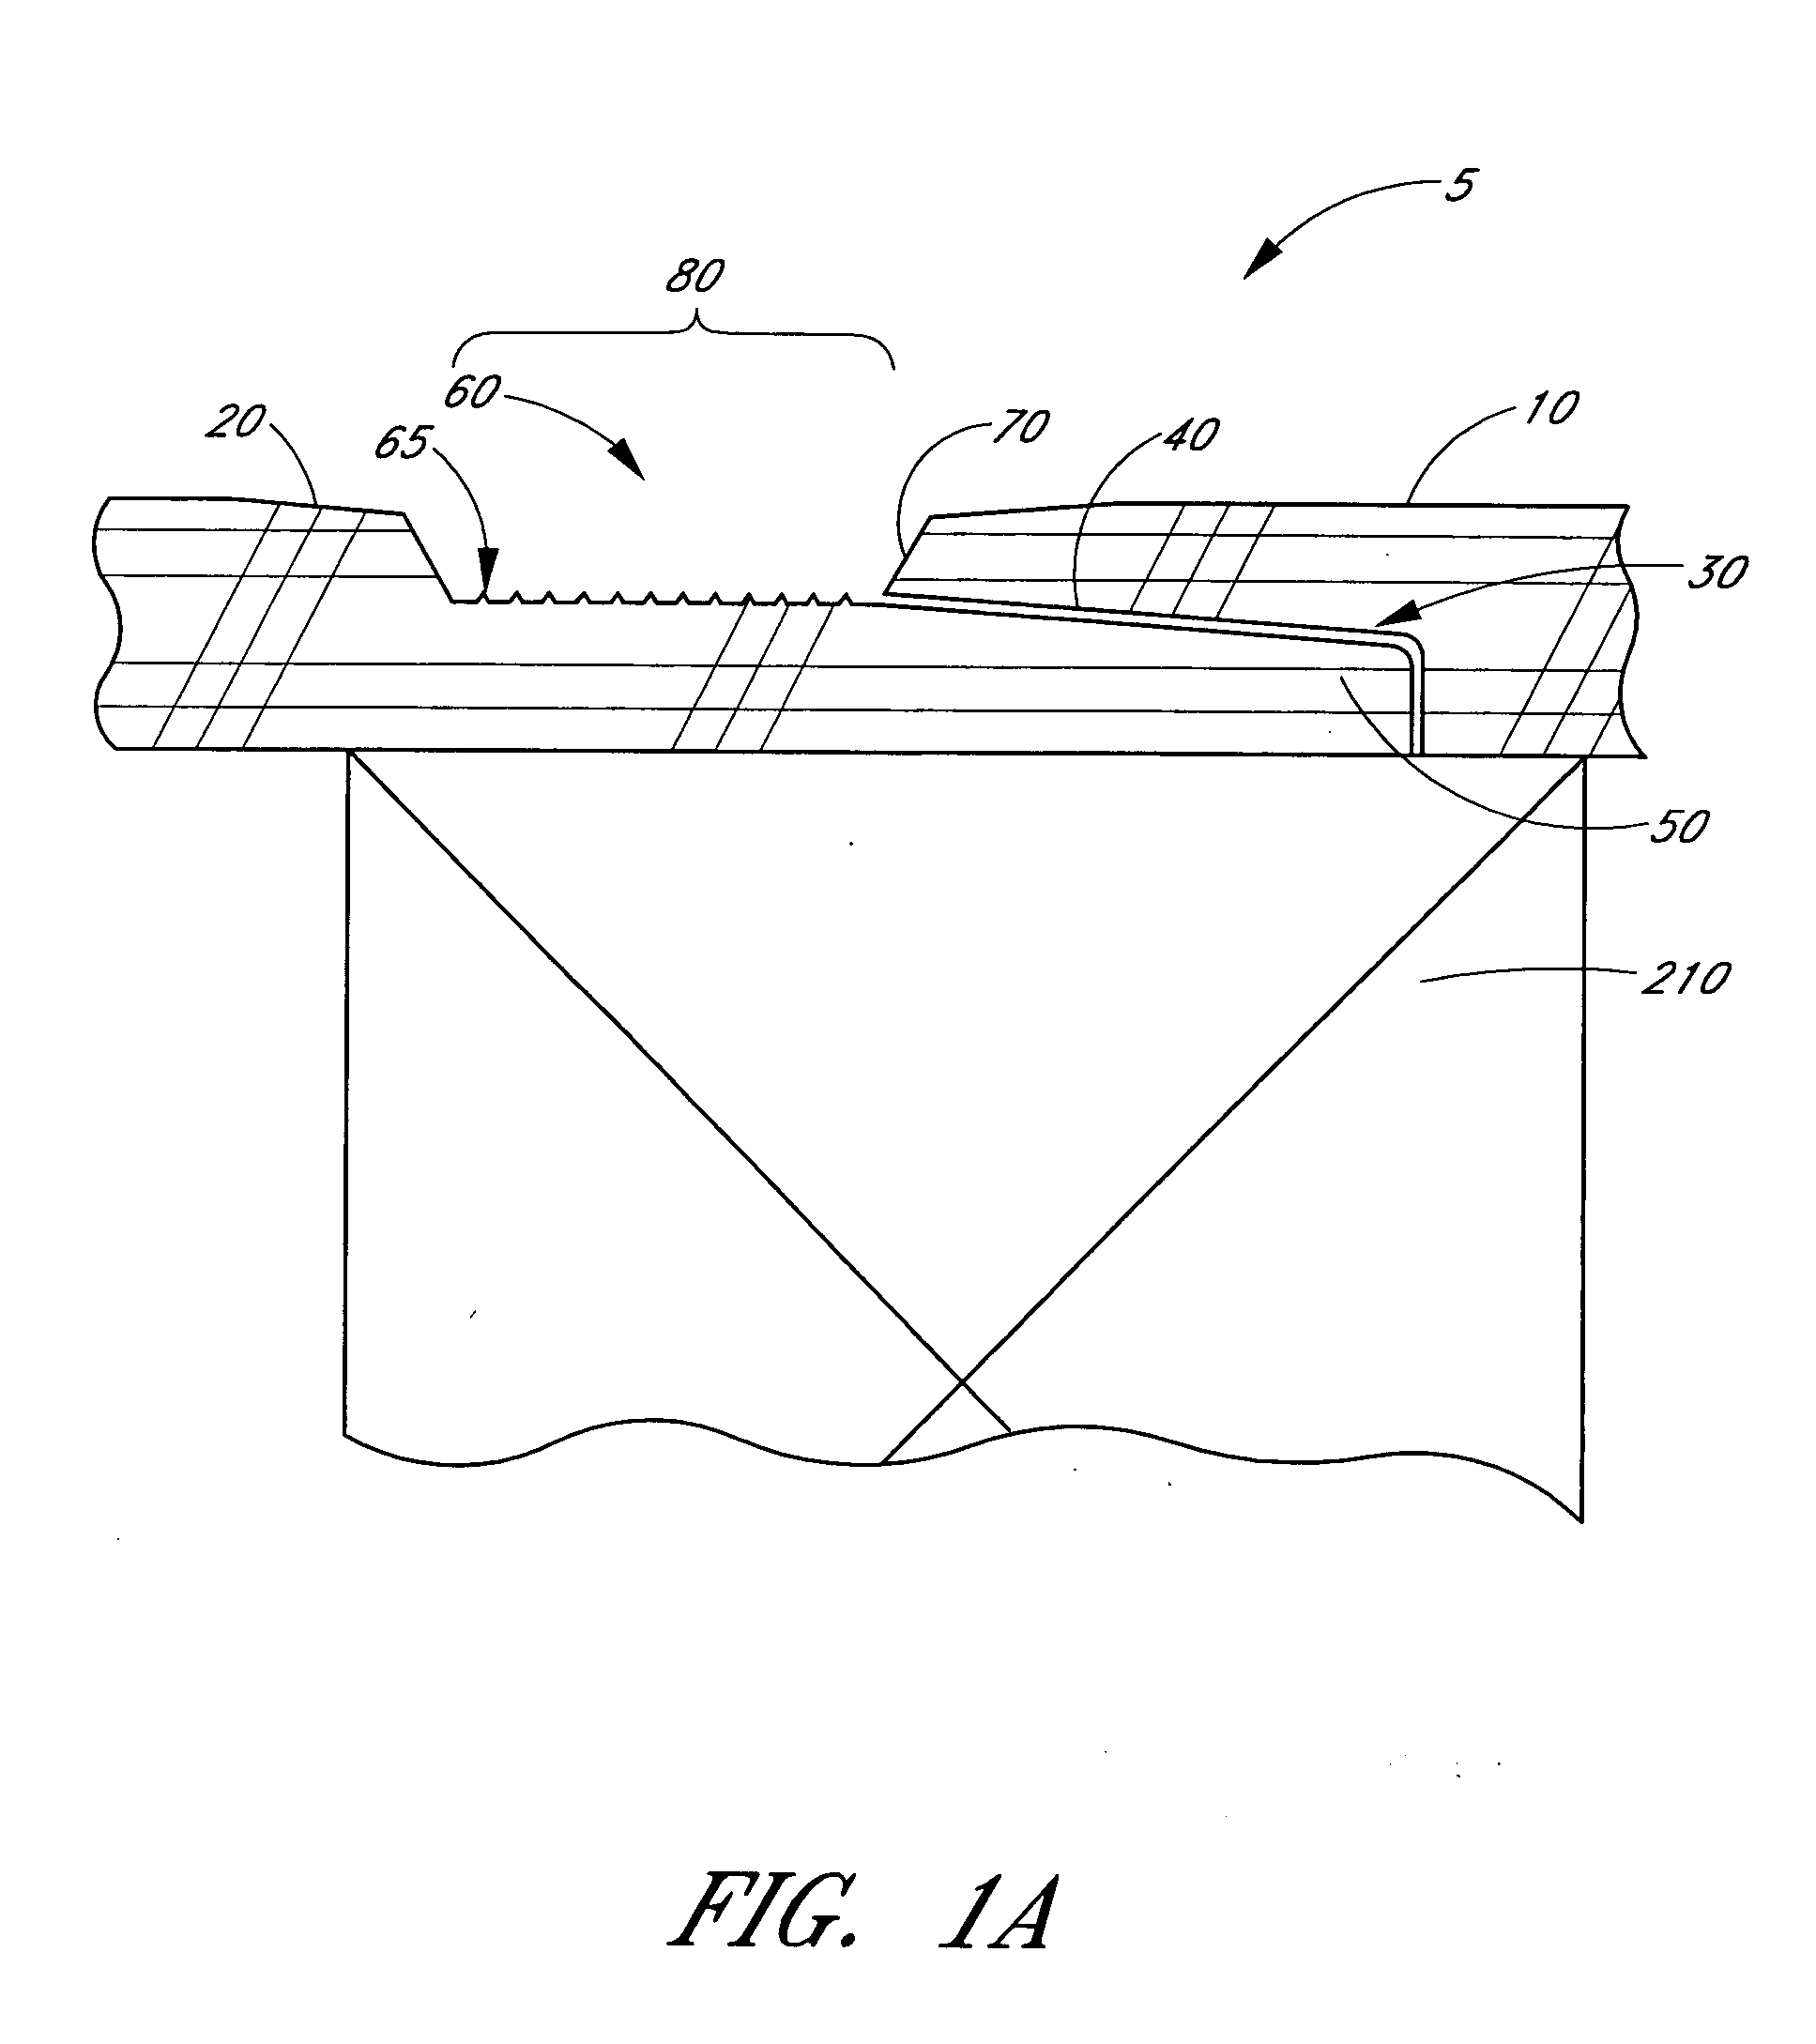 Building material and method of making and installing the same